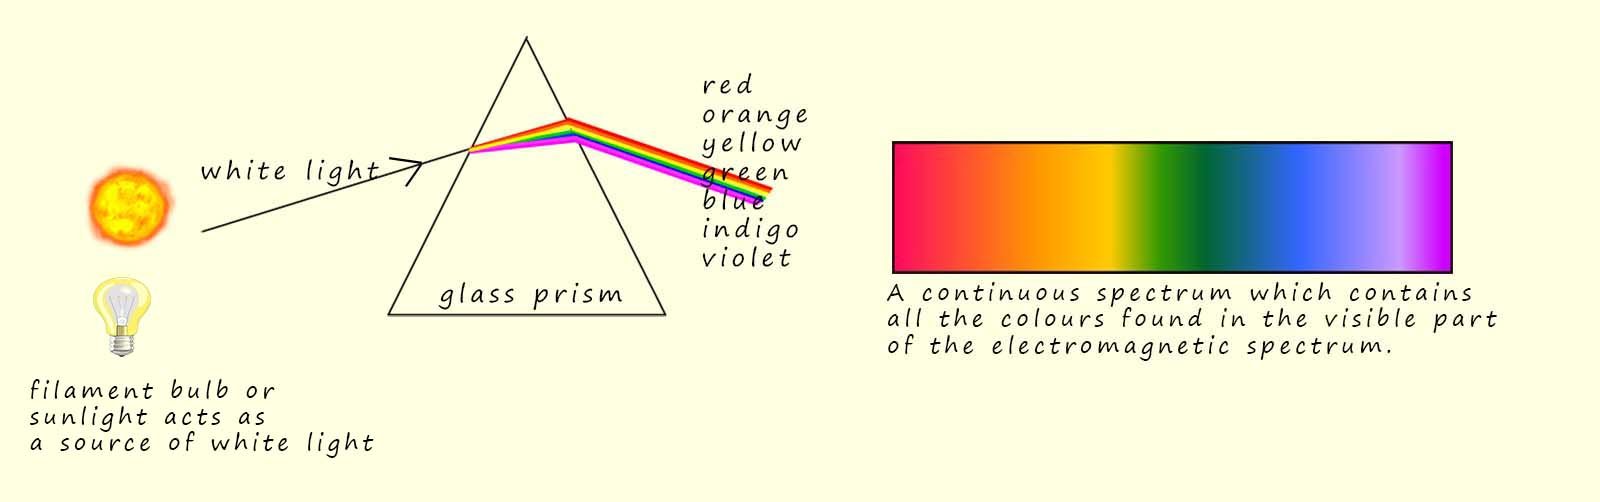 Production of a continuous spectrum by passing white light through a glass prism